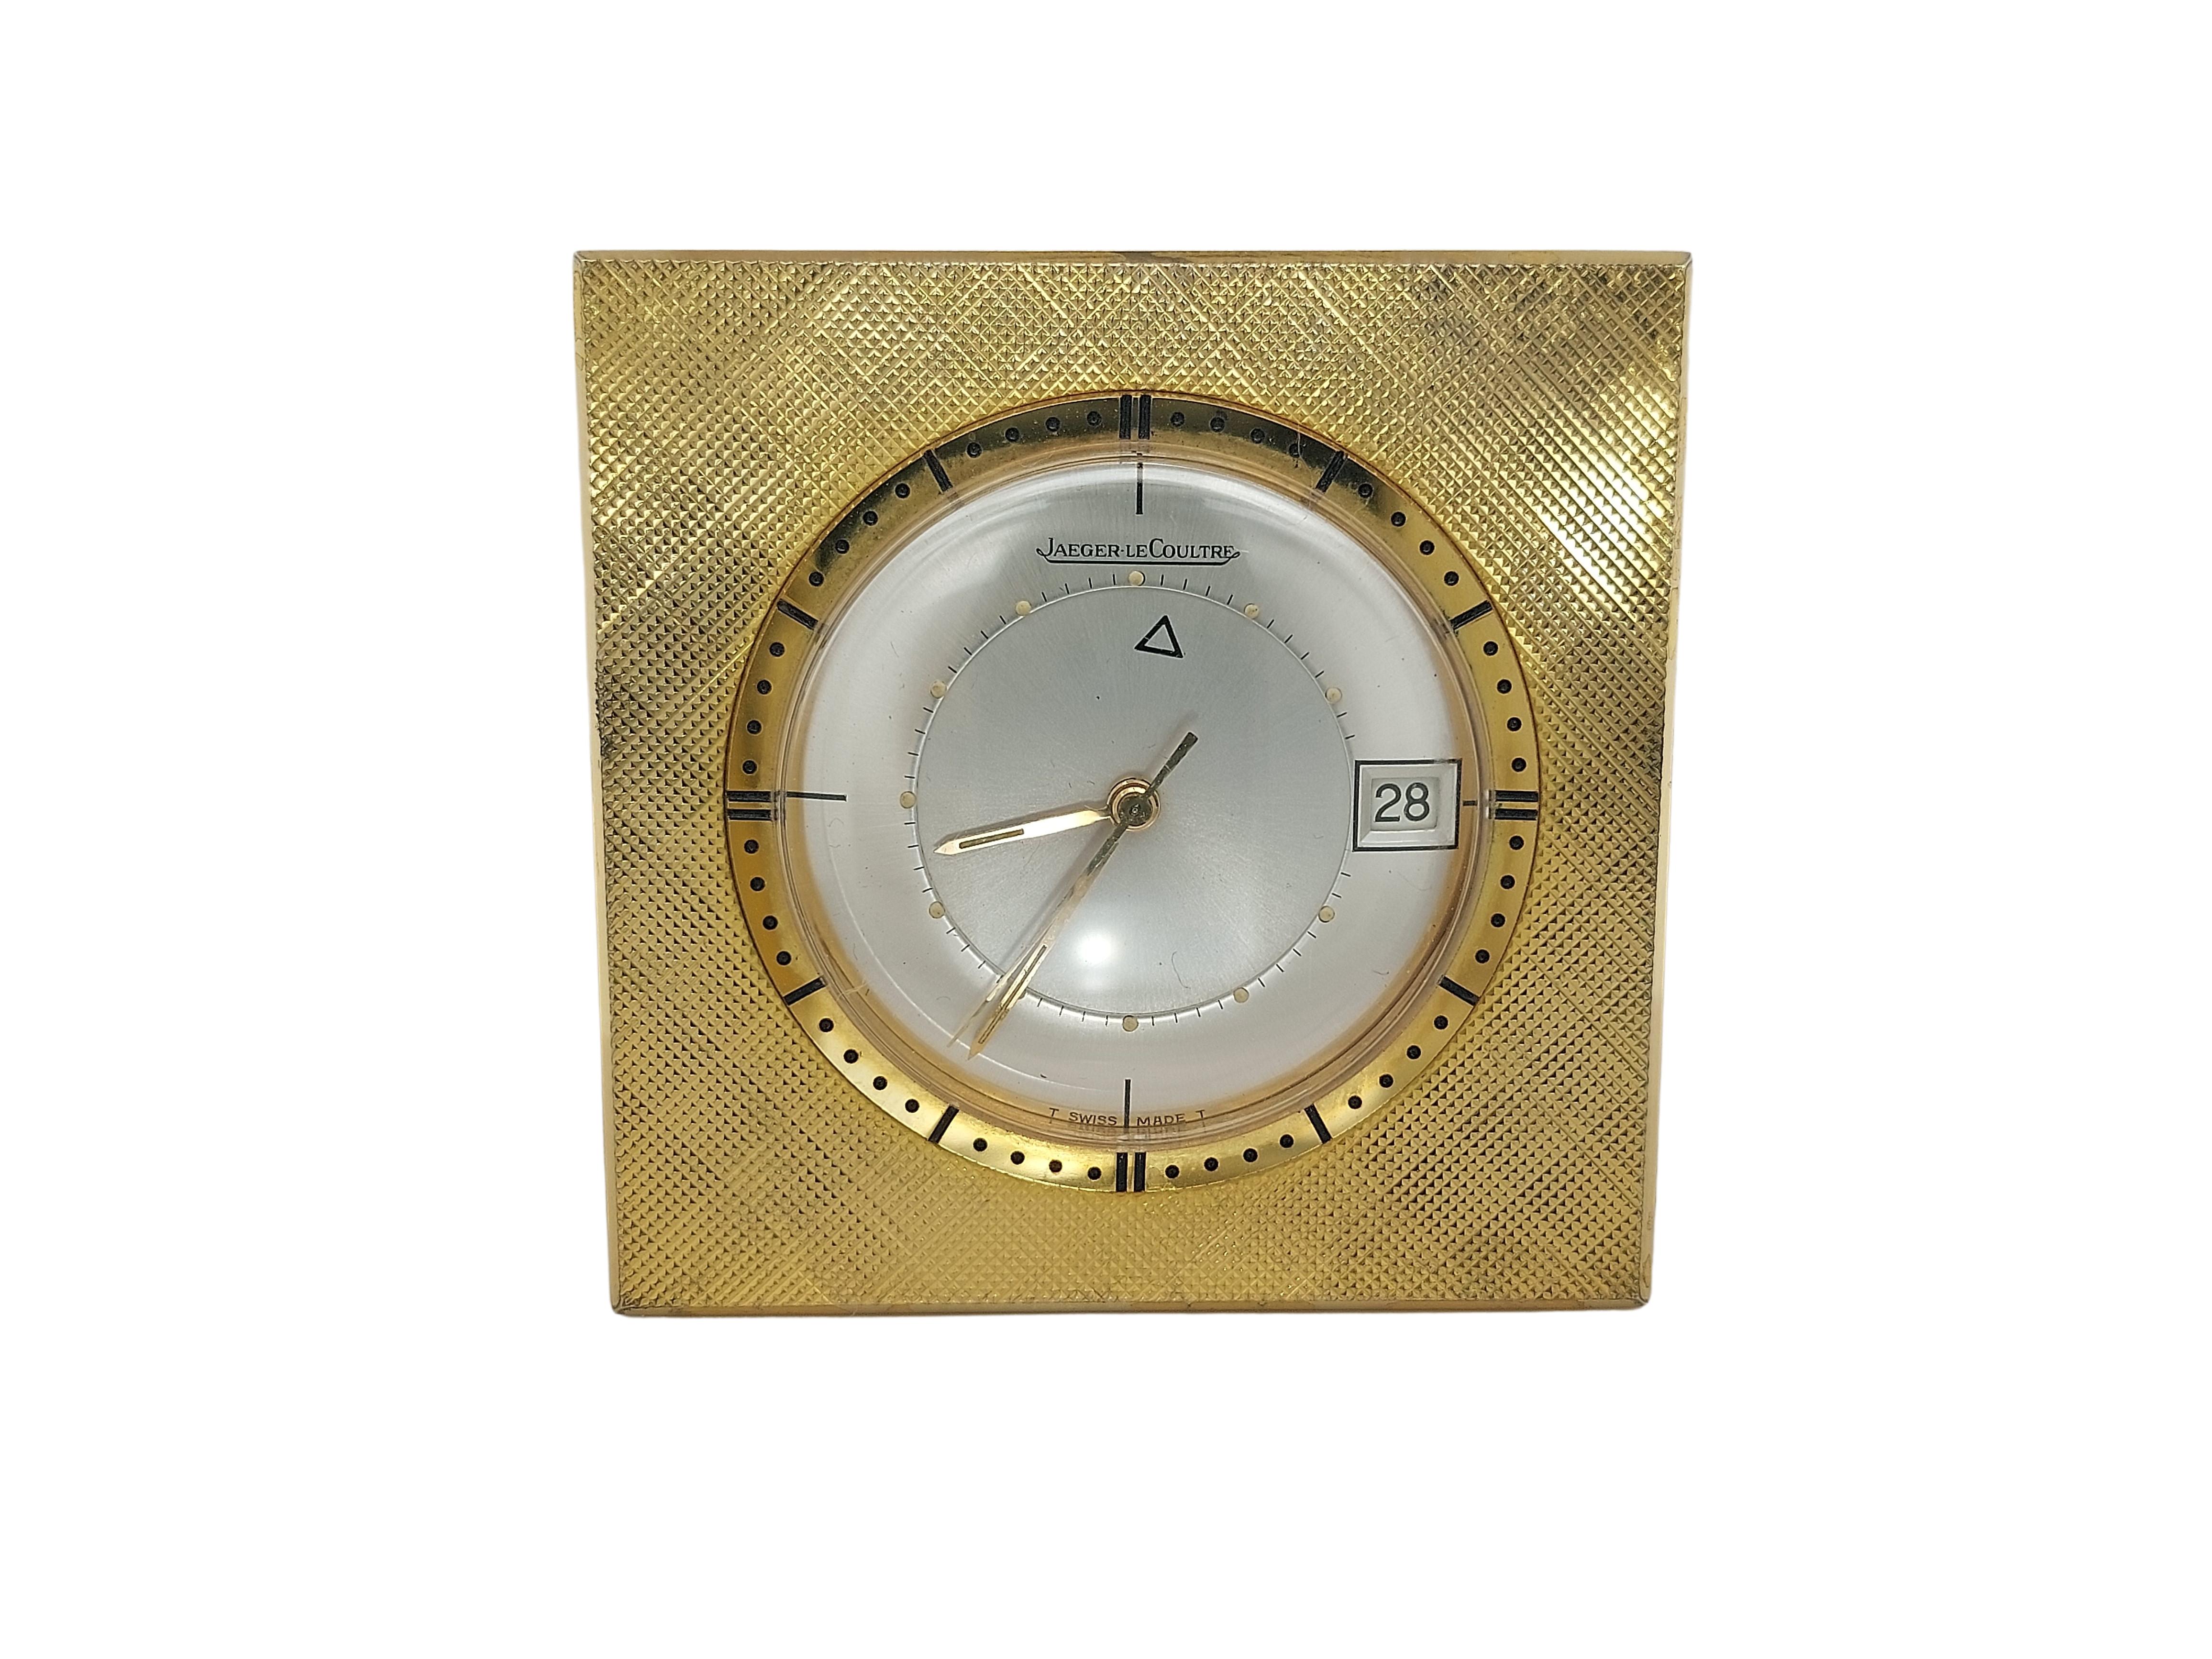 Vintage Travel Alarm Clock Made by Jaeger LeCoultre, Memovox Model, Switzerland, 

Movement: mechanical movement

Case: Gold plated case, Measurements 45 mm x 45 mm, 

Dial: Silvery dial, gold indexes, date window at 3 o'clock and bears the company